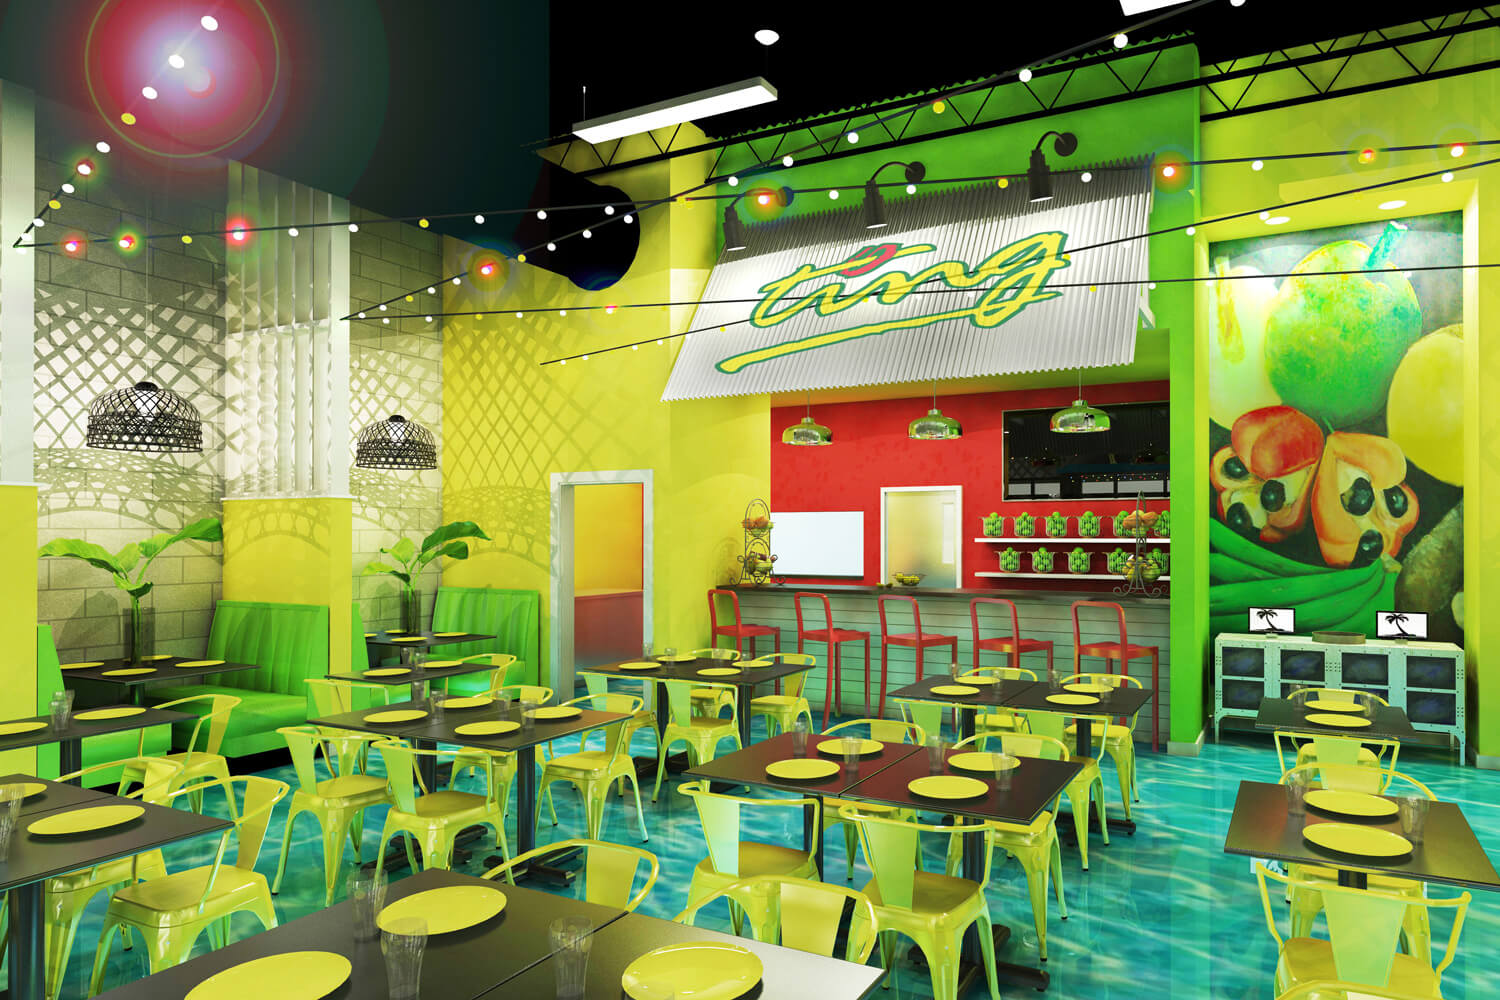 Island Delight Restaurant Designed by Foshee Architecture - Artist Depiction and Rendering of Interior Looking Towards the Juice Bar